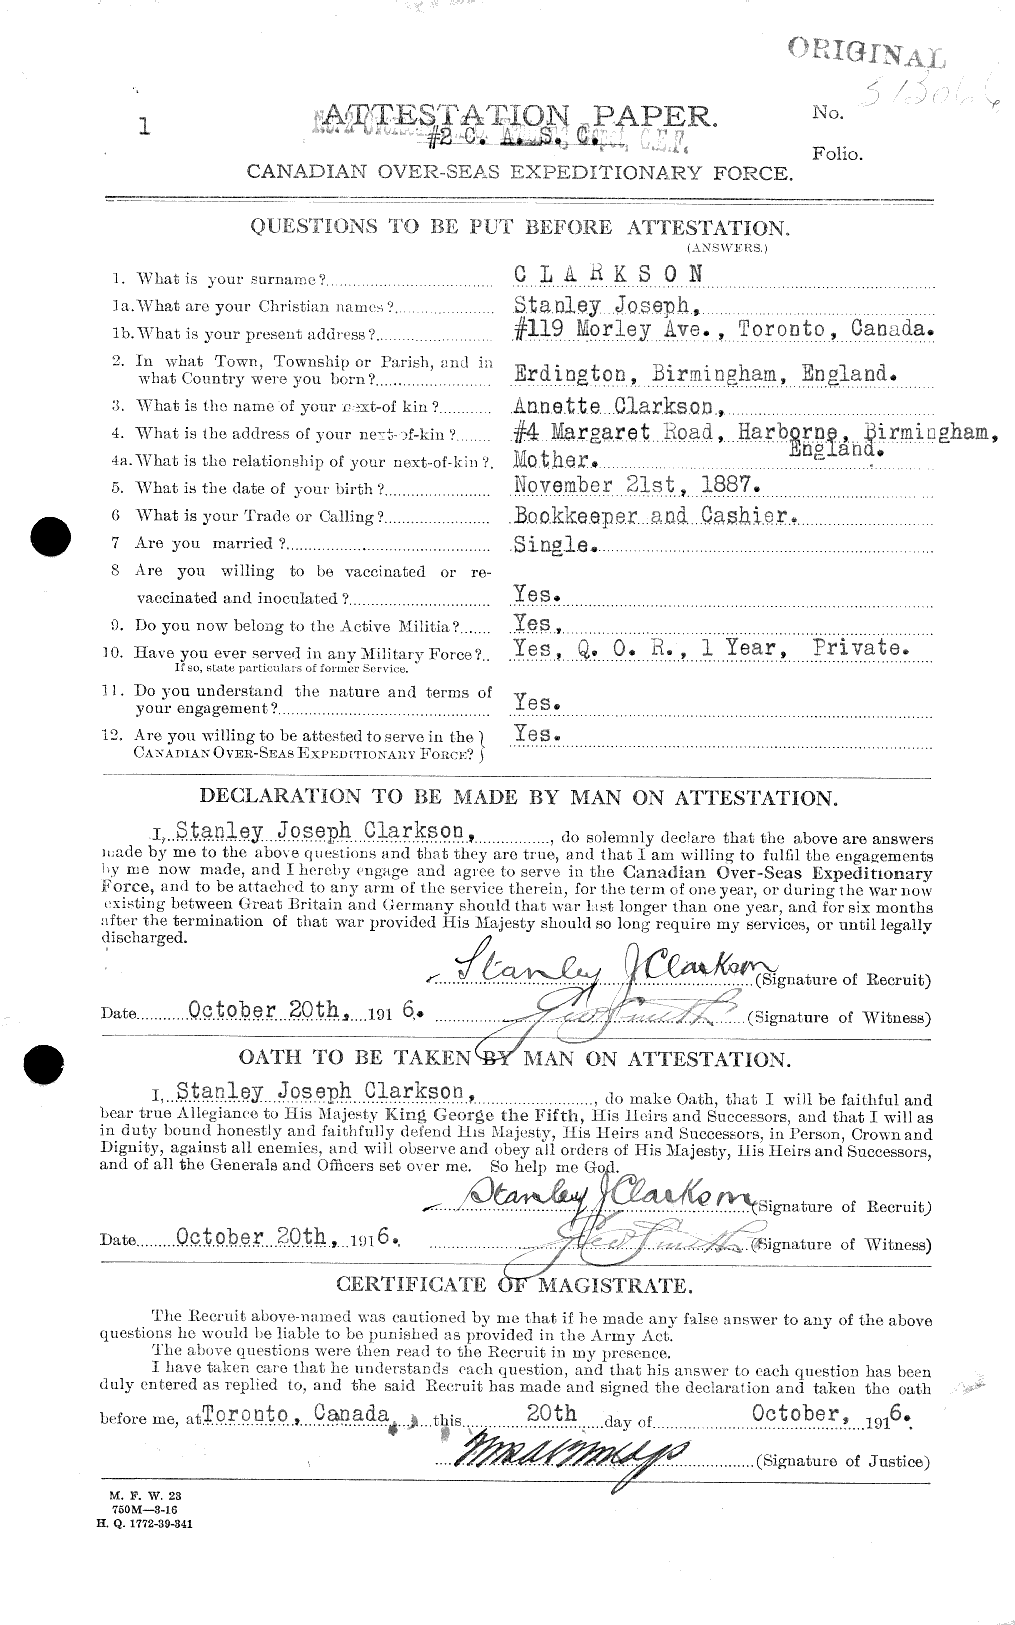 Personnel Records of the First World War - CEF 019011a